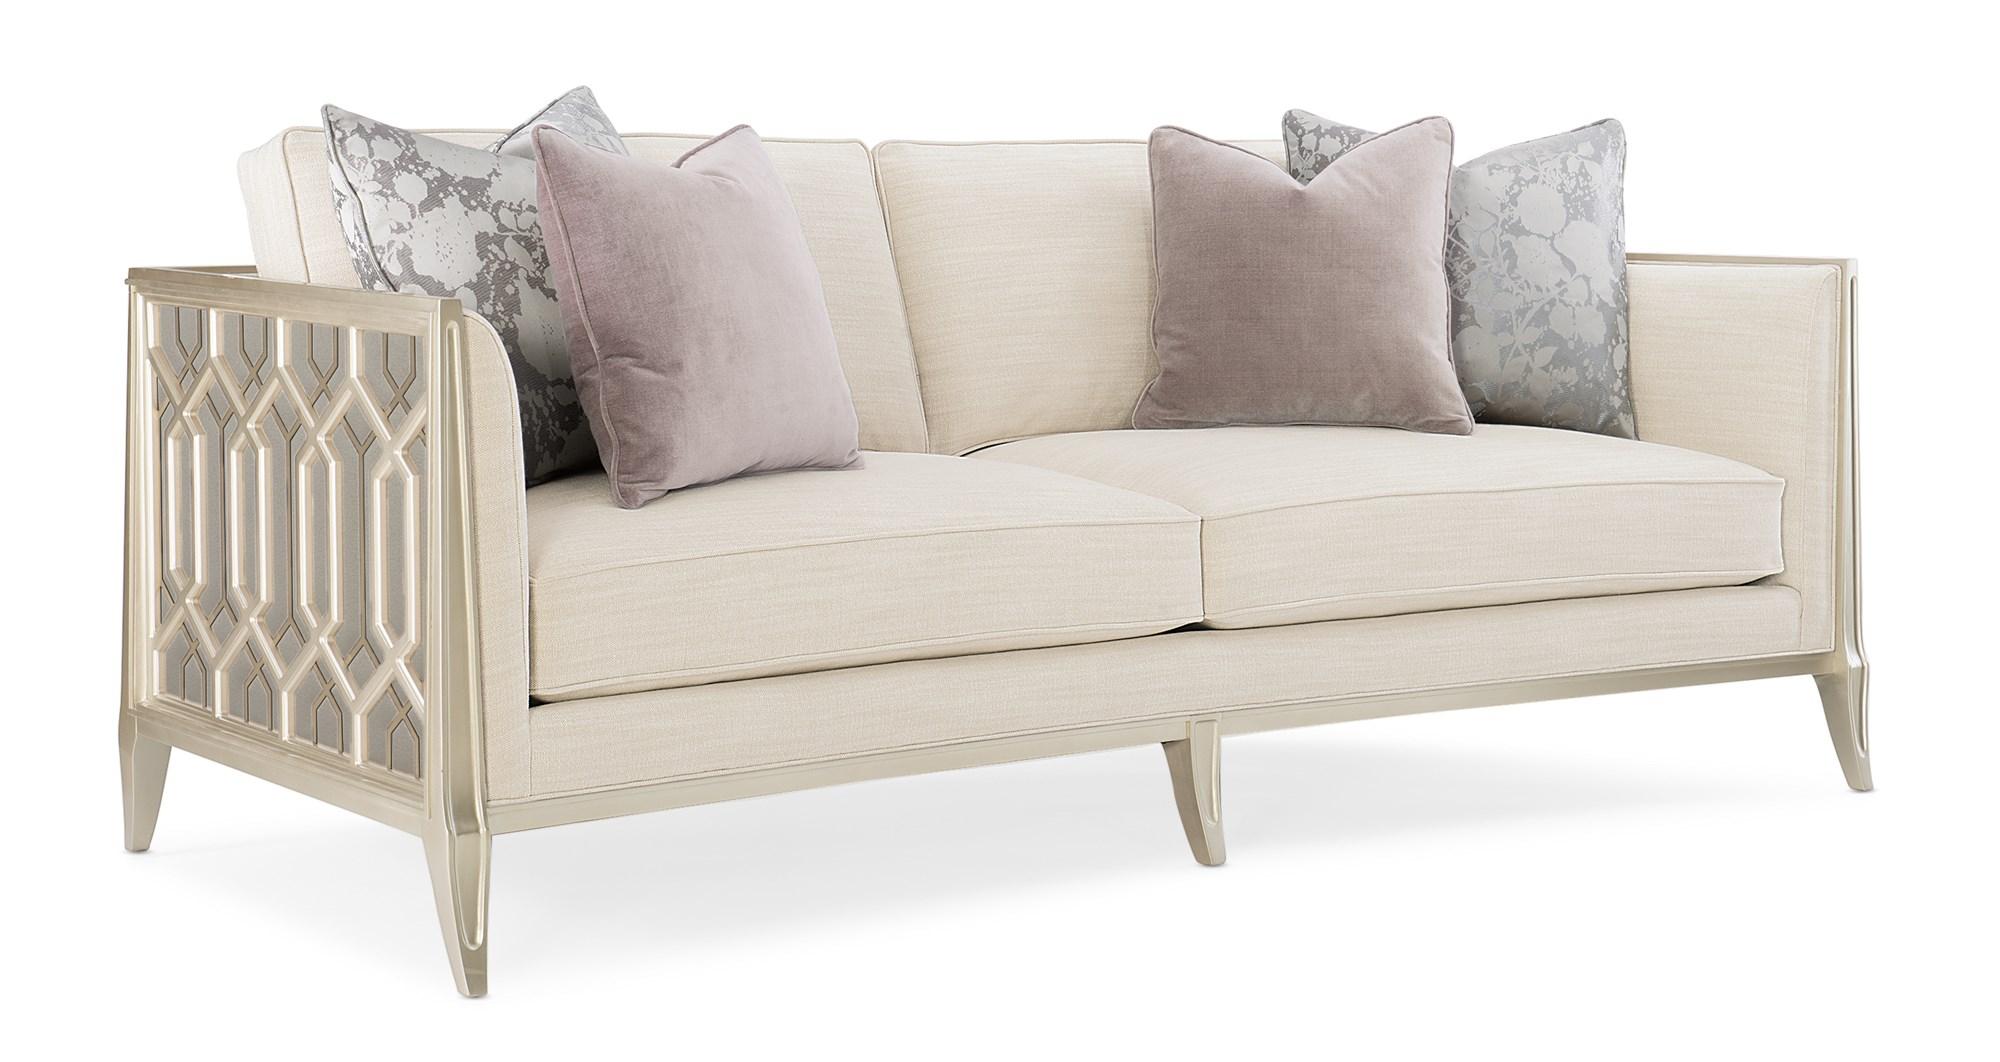 Contemporary Sofa JUST DUET UPH-420-111-A in Champagne, Beige Fabric